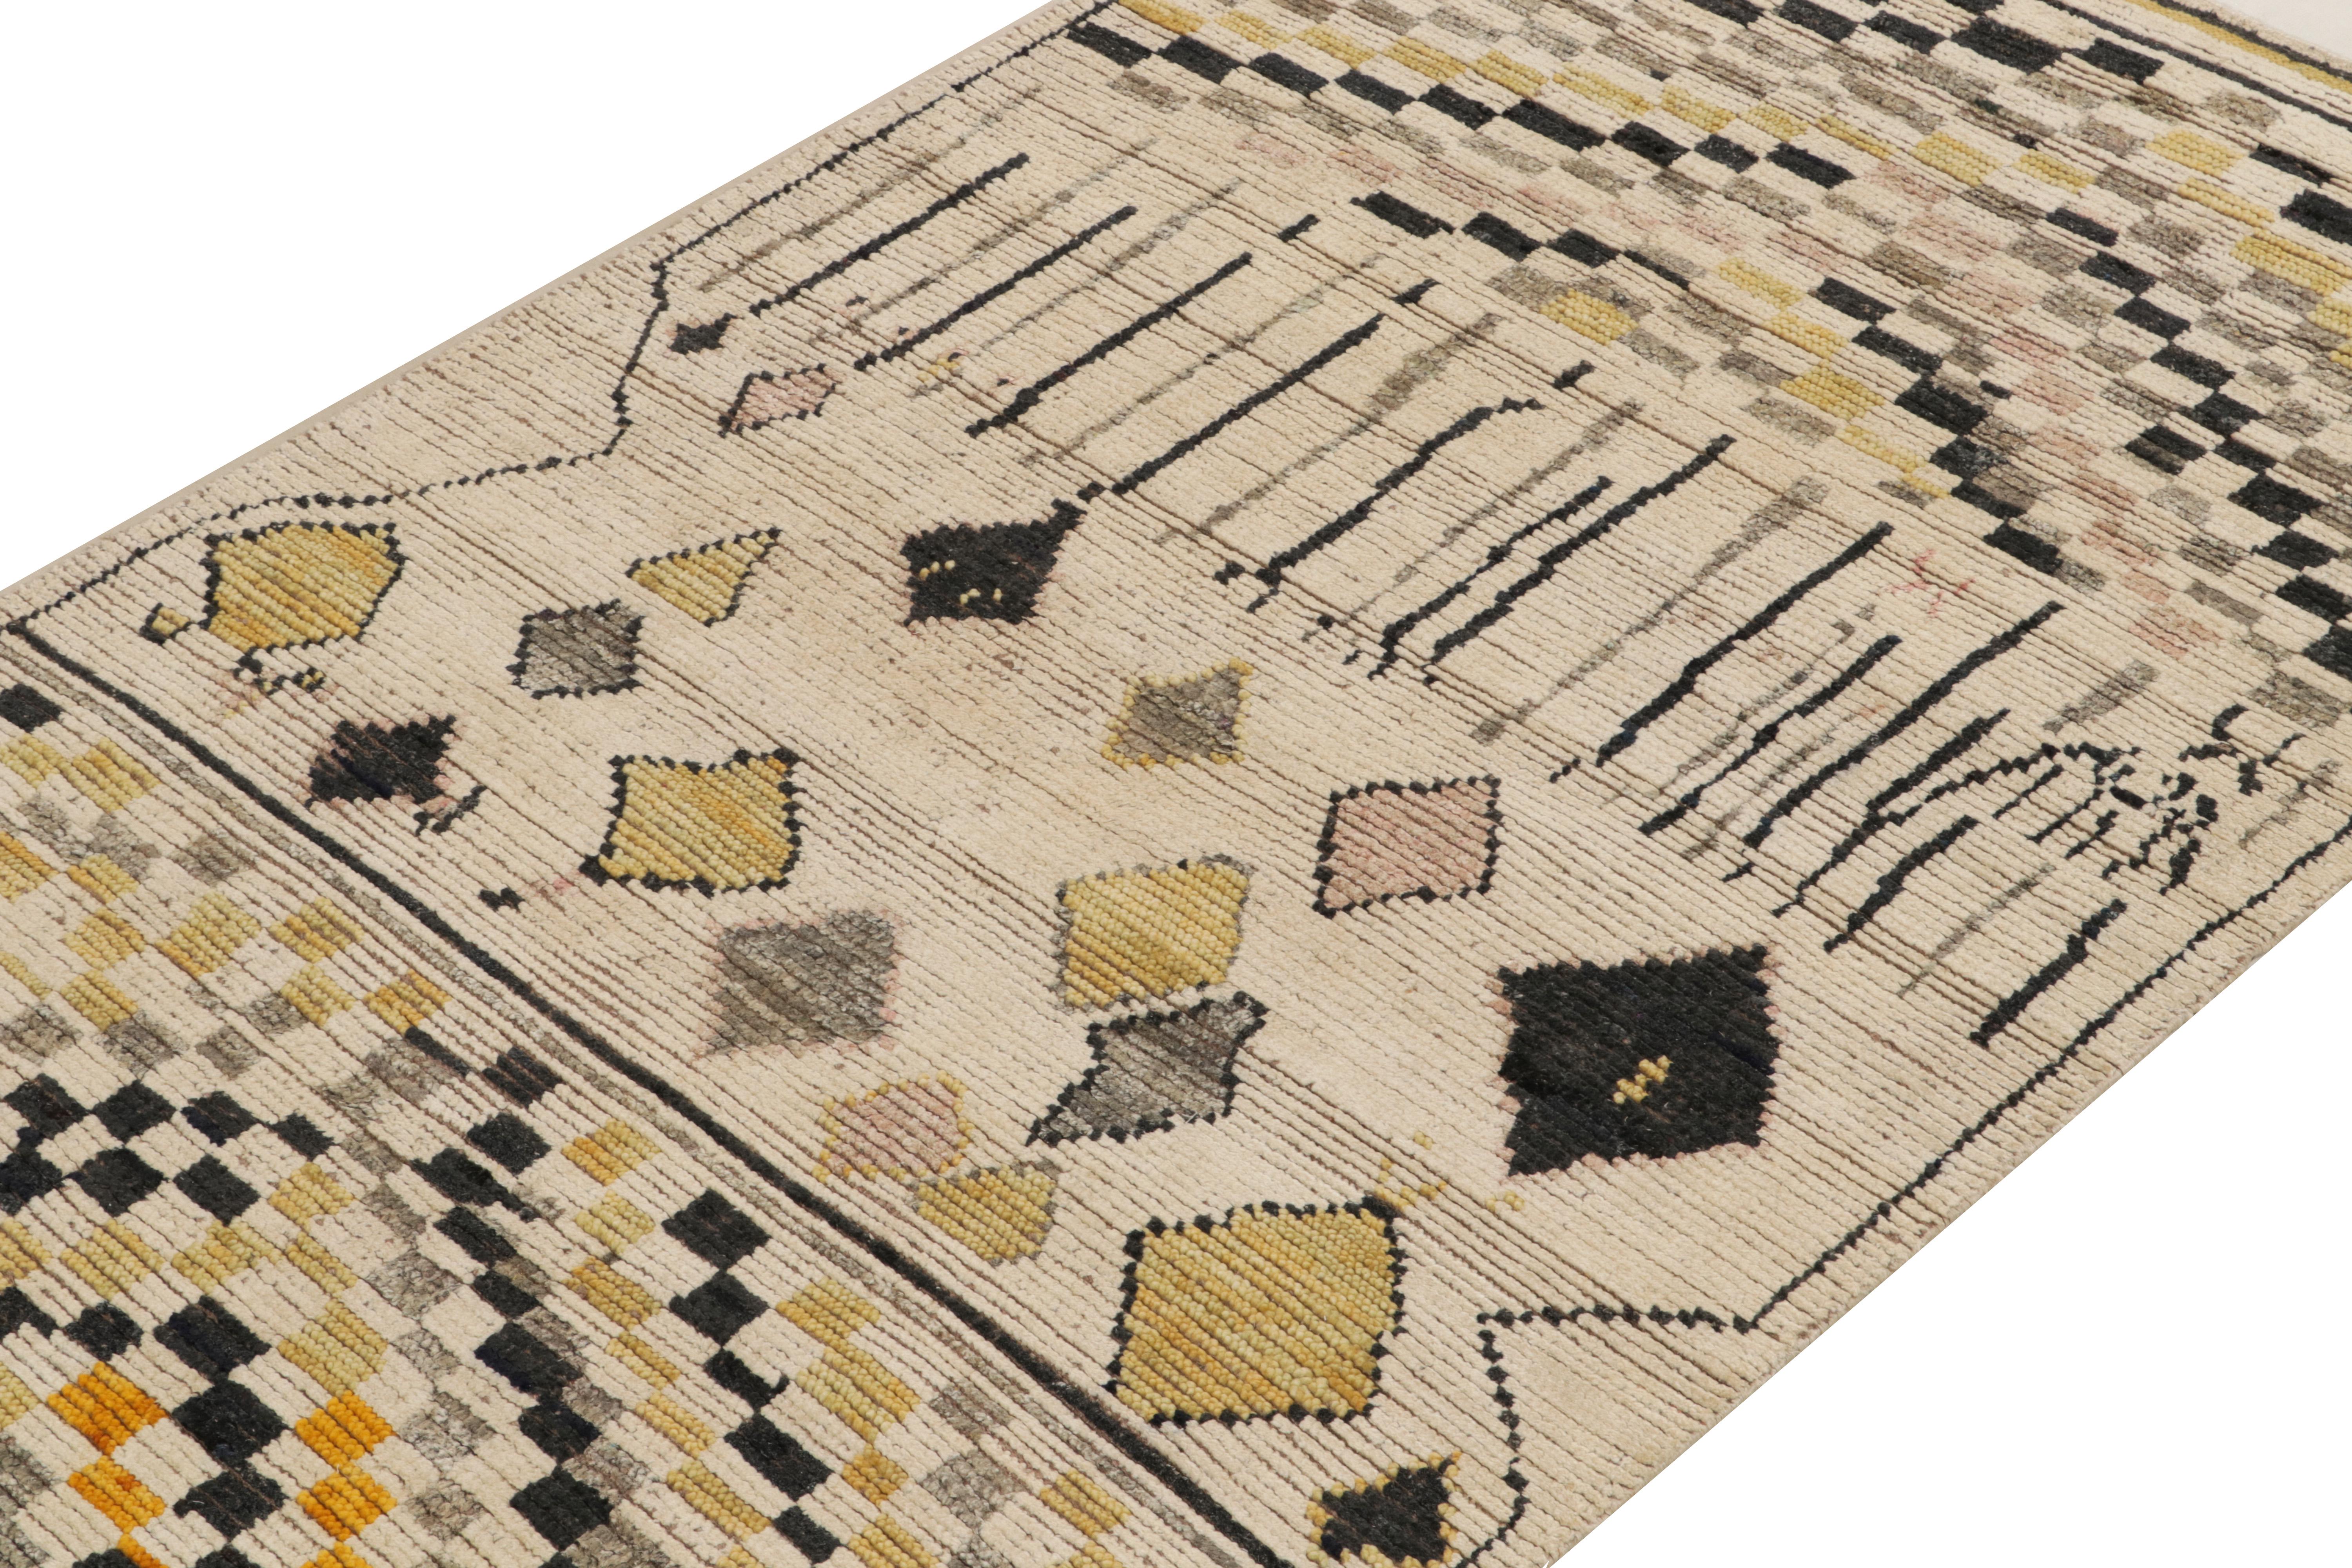 Indian Rug & Kilim's Moroccan Style Rug in White, Gold, Black Geometric Pattern For Sale